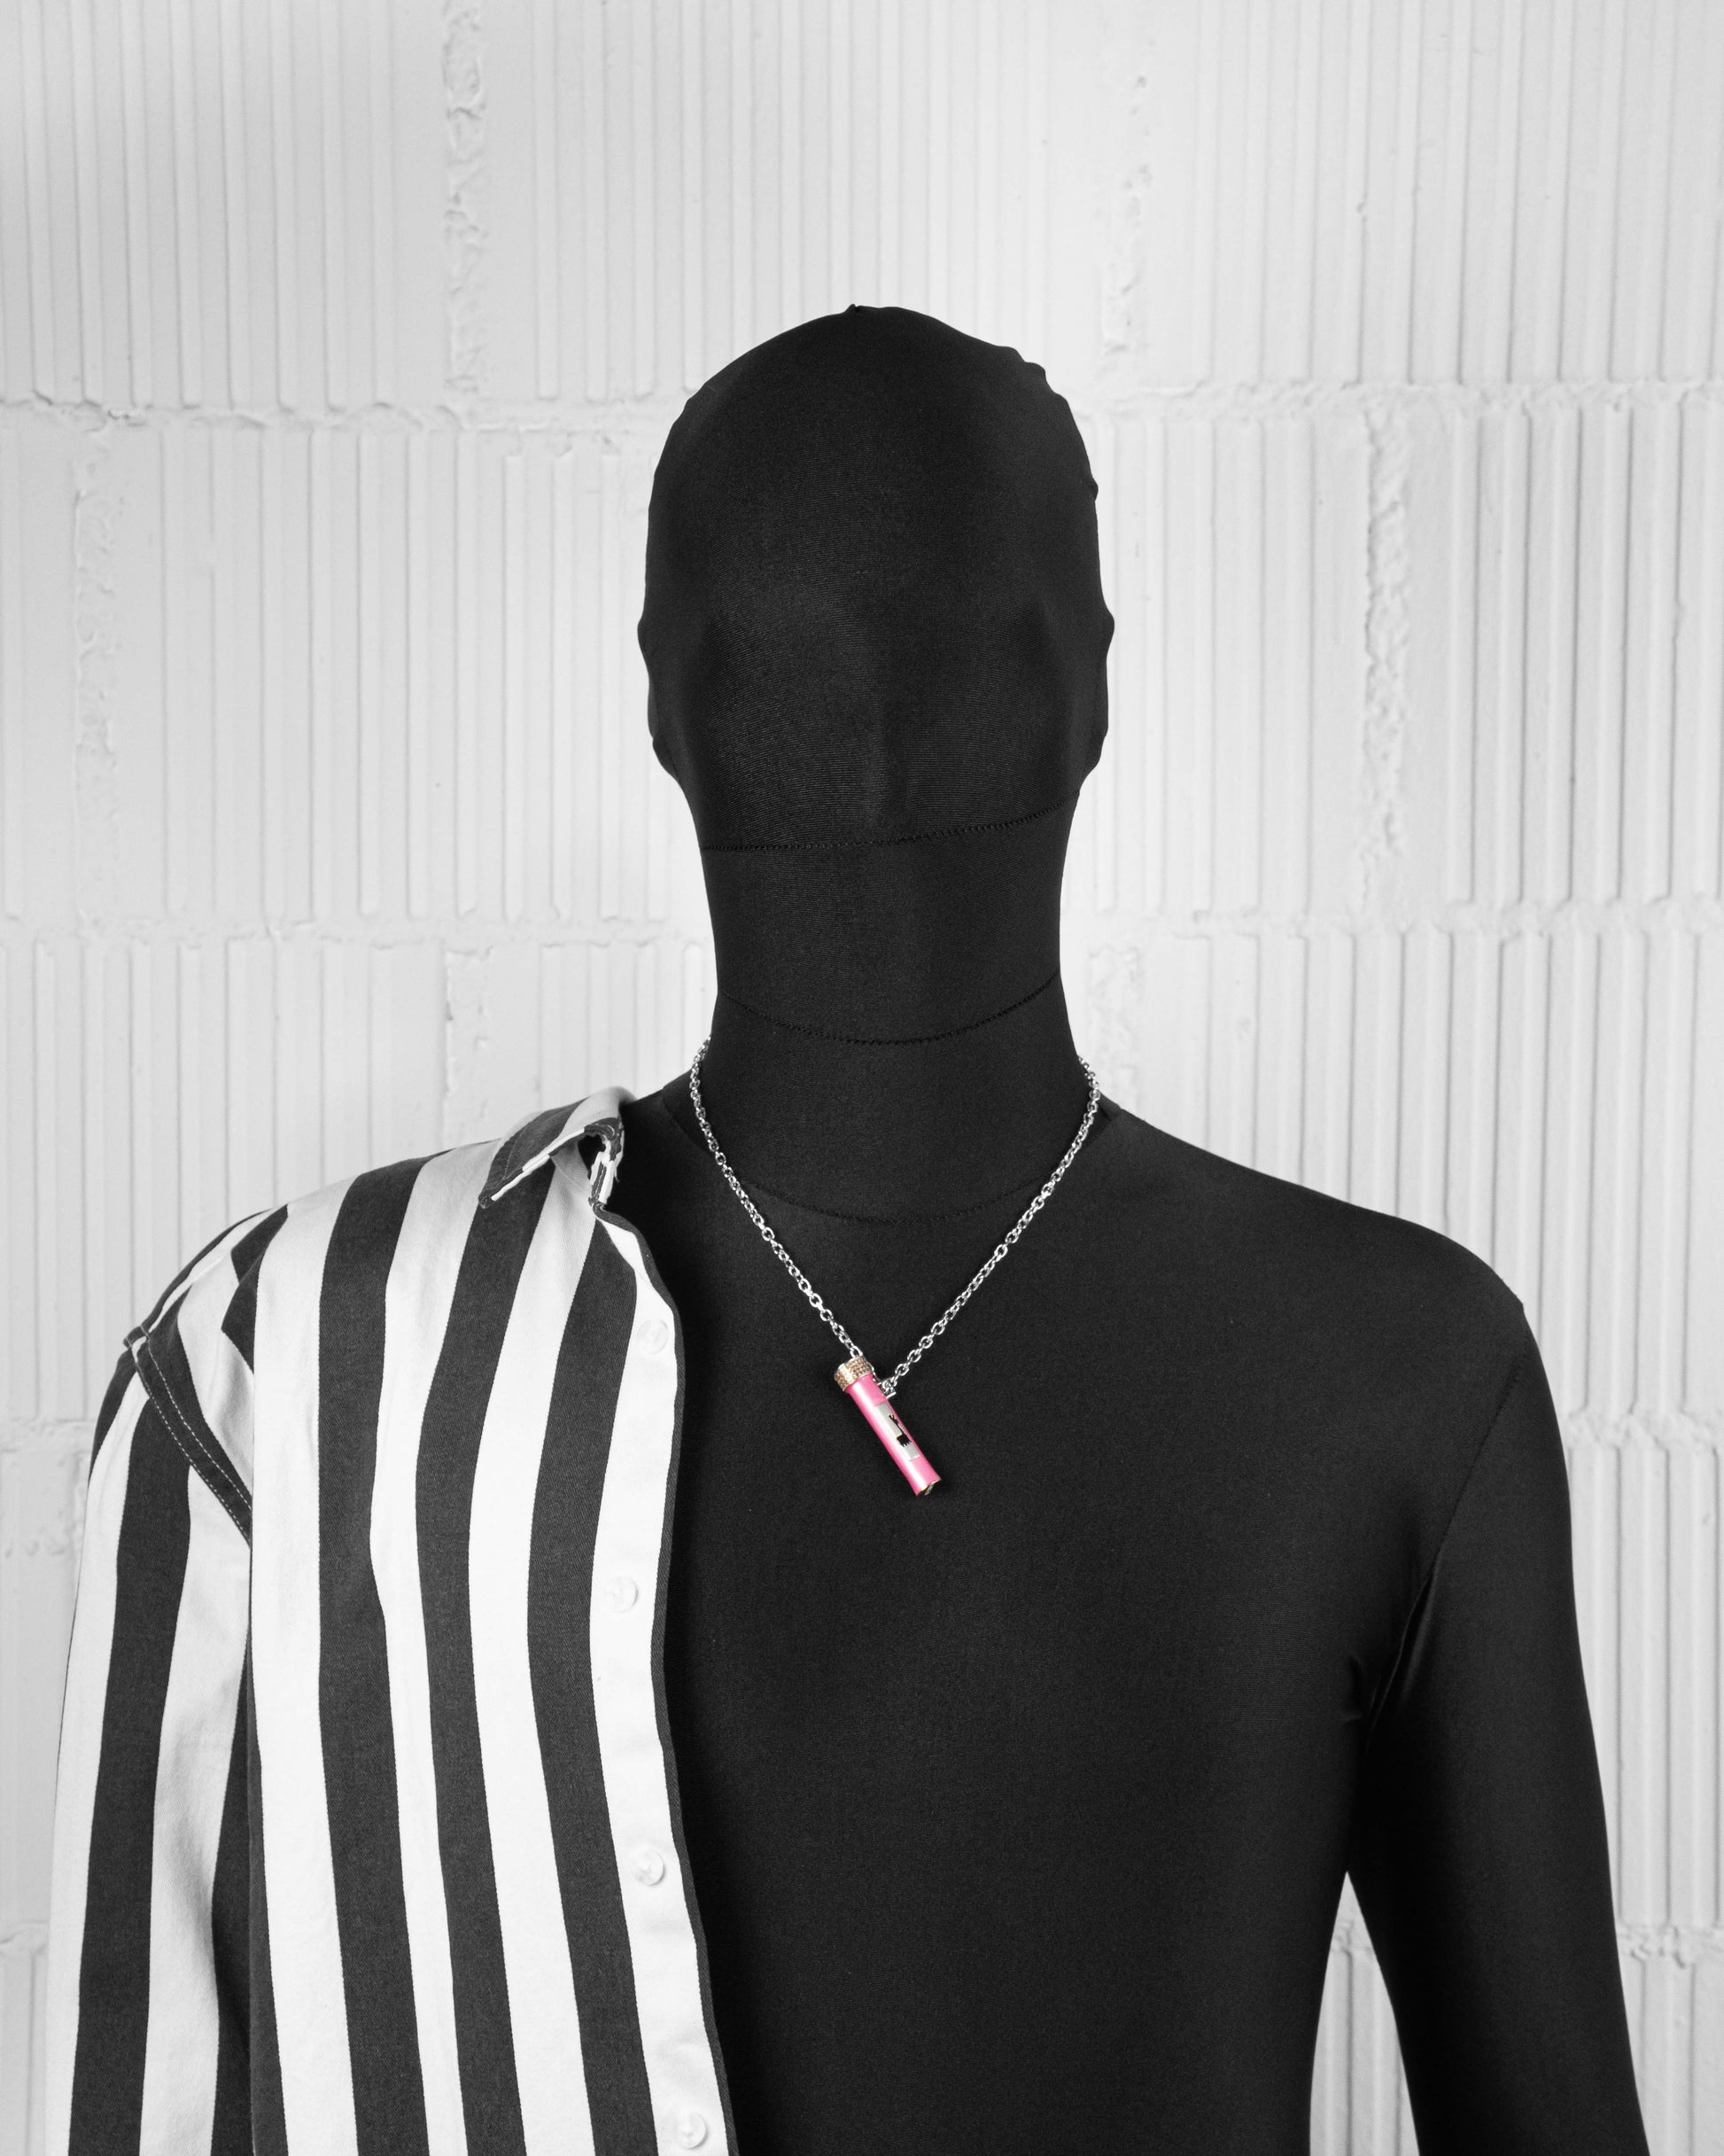 man with black suit wearing 18k white gold coated vial pendant necklace with hand-set micropavé stones in coffee, pink enamel and black enamel llama with 3mm rolo chain